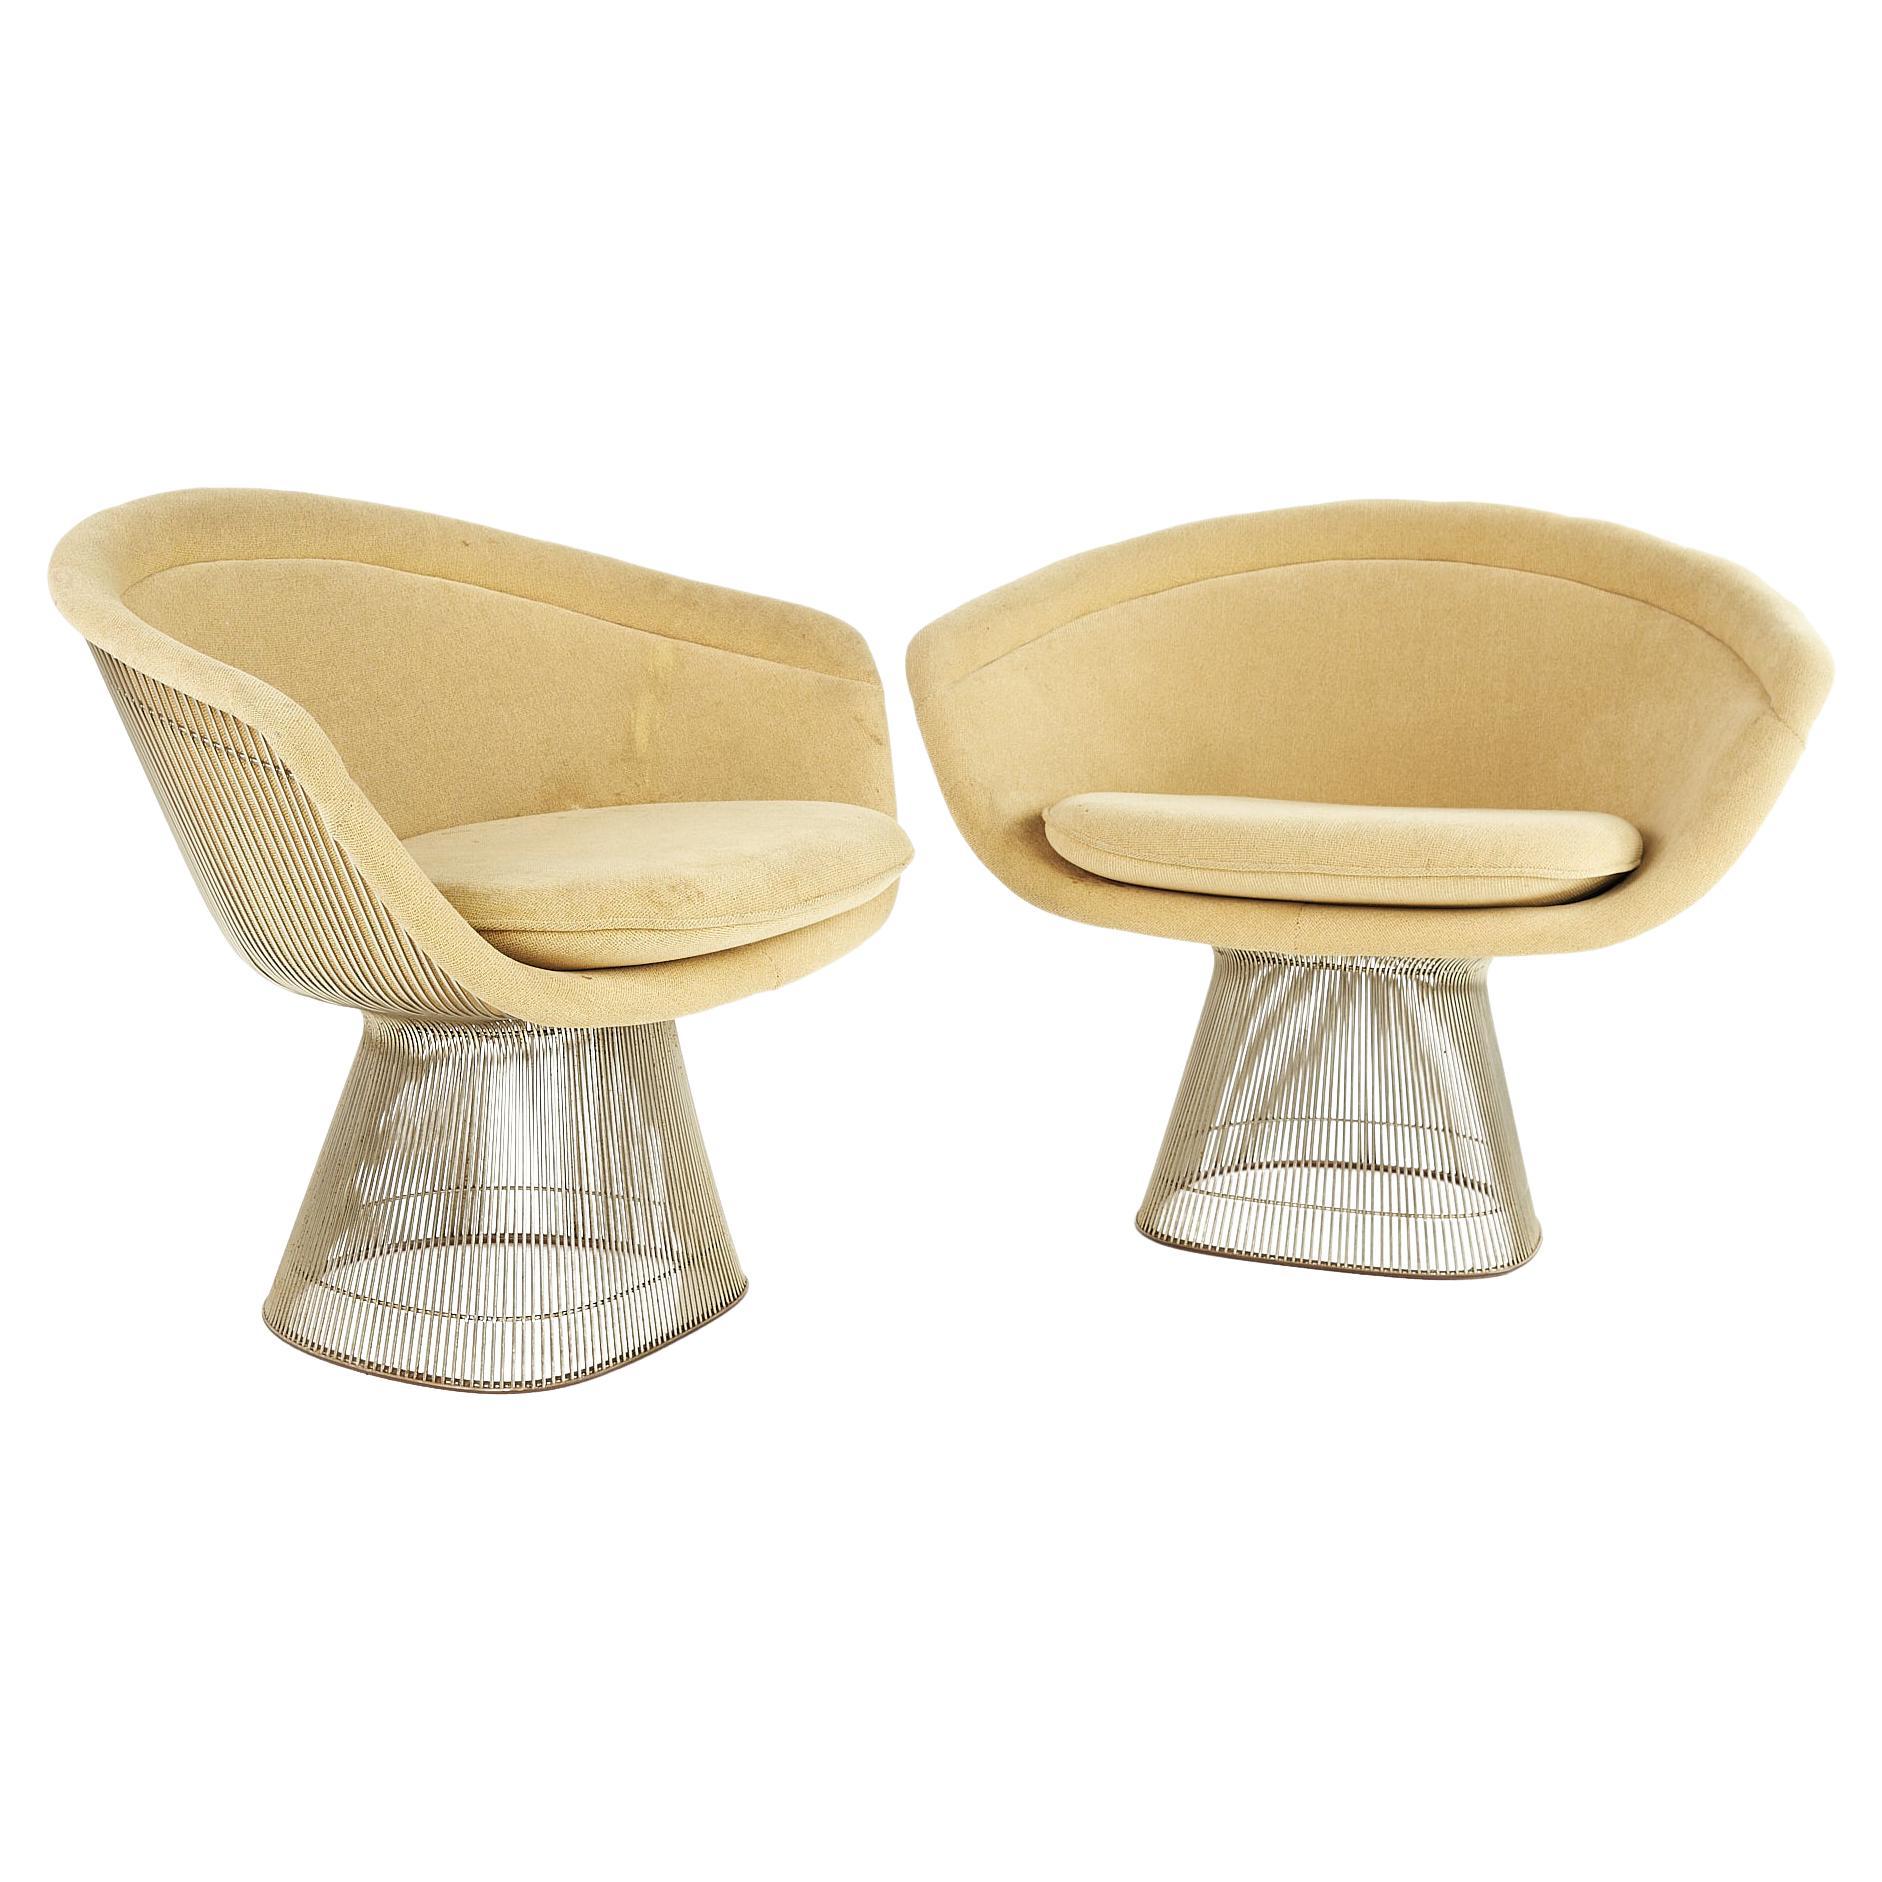 Warren Platner for Knoll Mid Century Lounge Chairs, Pair